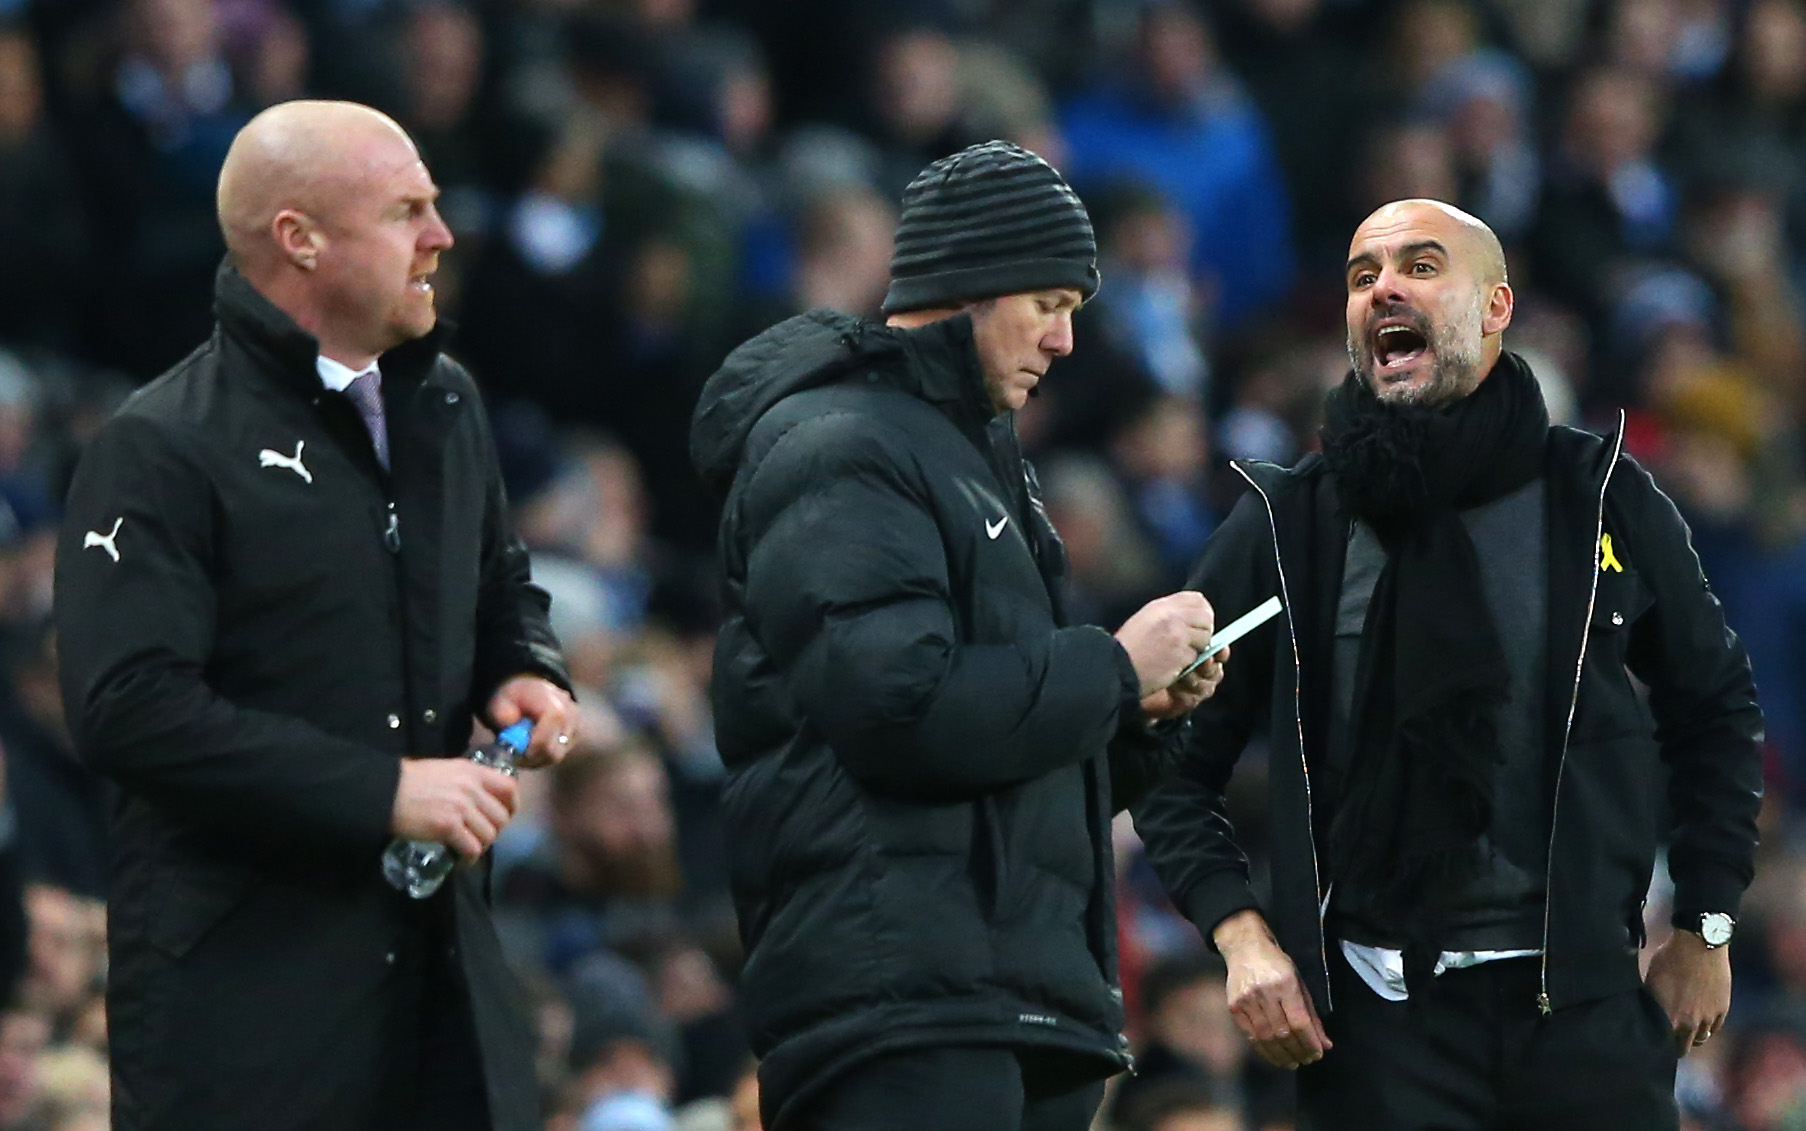 MANCHESTER, ENGLAND - JANUARY 06:  Sean Dyche, Manager of Burnley and Josep Guardiola, Manager of Manchester City argue during the The Emirates FA Cup Third Round match between Manchester City and Burnley at Etihad Stadium on January 6, 2018 in Manchester, England.  (Photo by Alex Livesey/Getty Images)